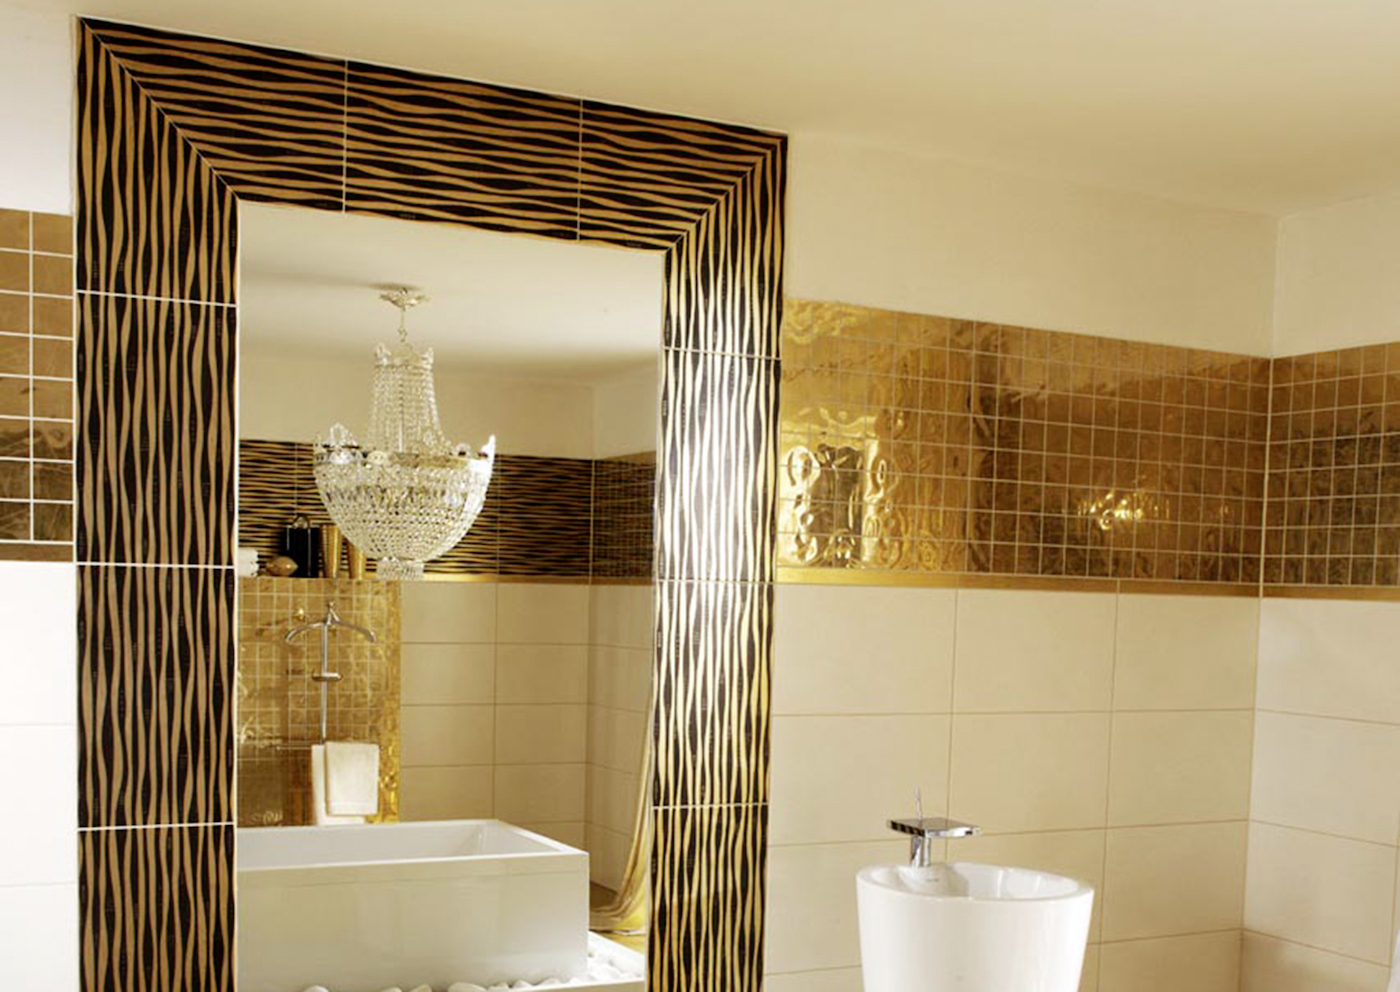 Gold Tiles realgold 7,2x7,2 wall tile, 7mm